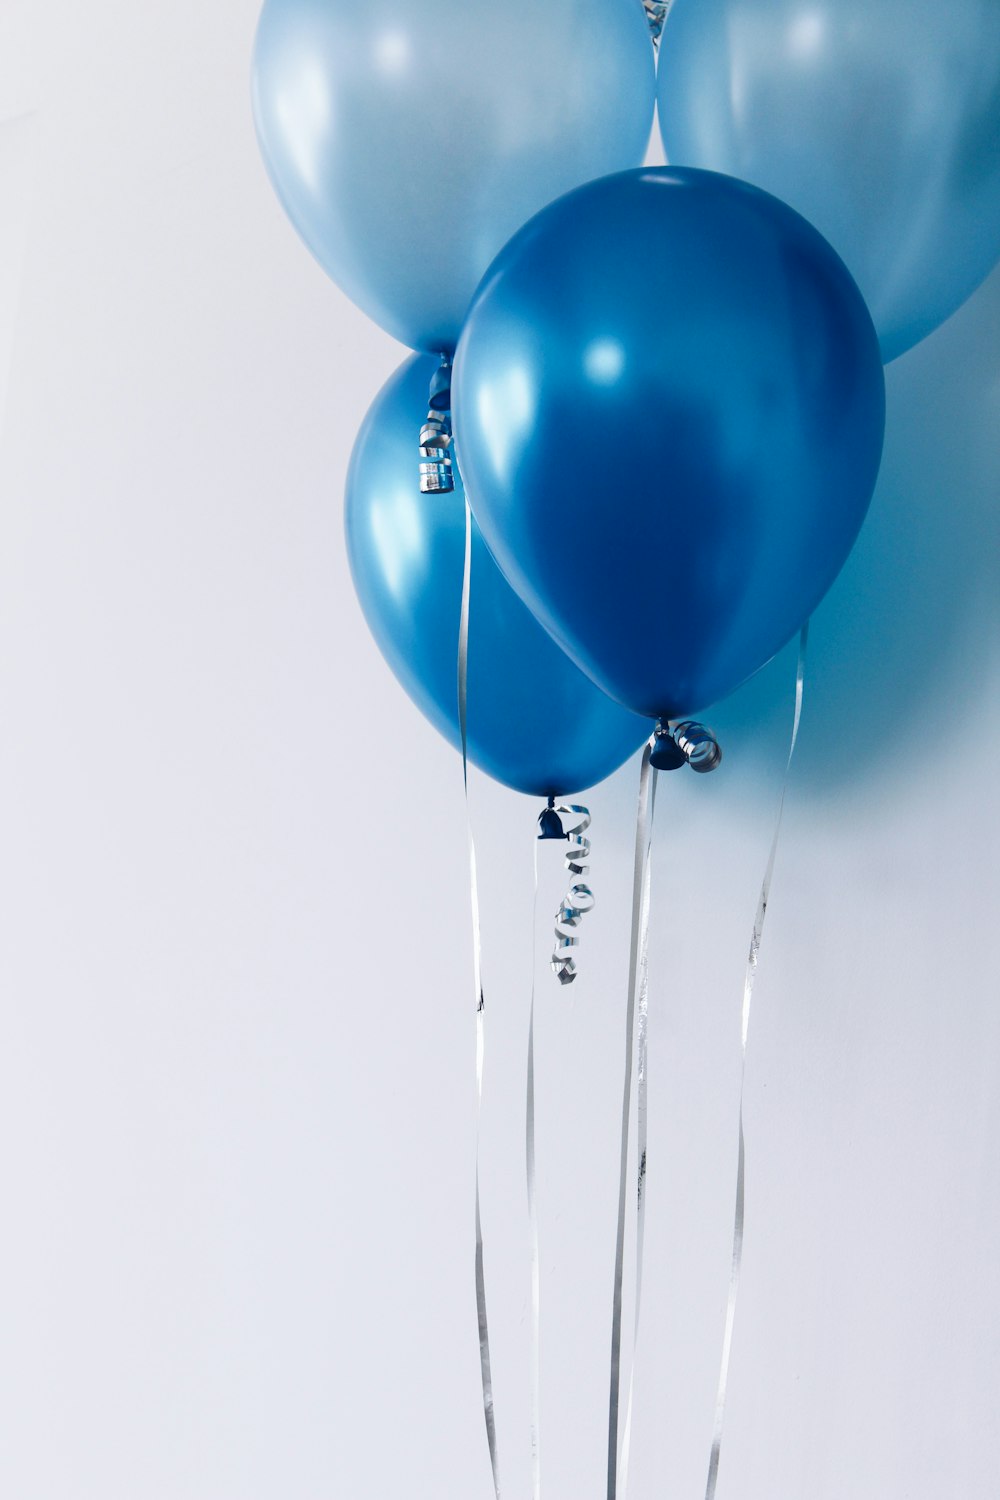 Best 20 Balloon Images Download Free Pictures On Unsplash Images, Photos, Reviews